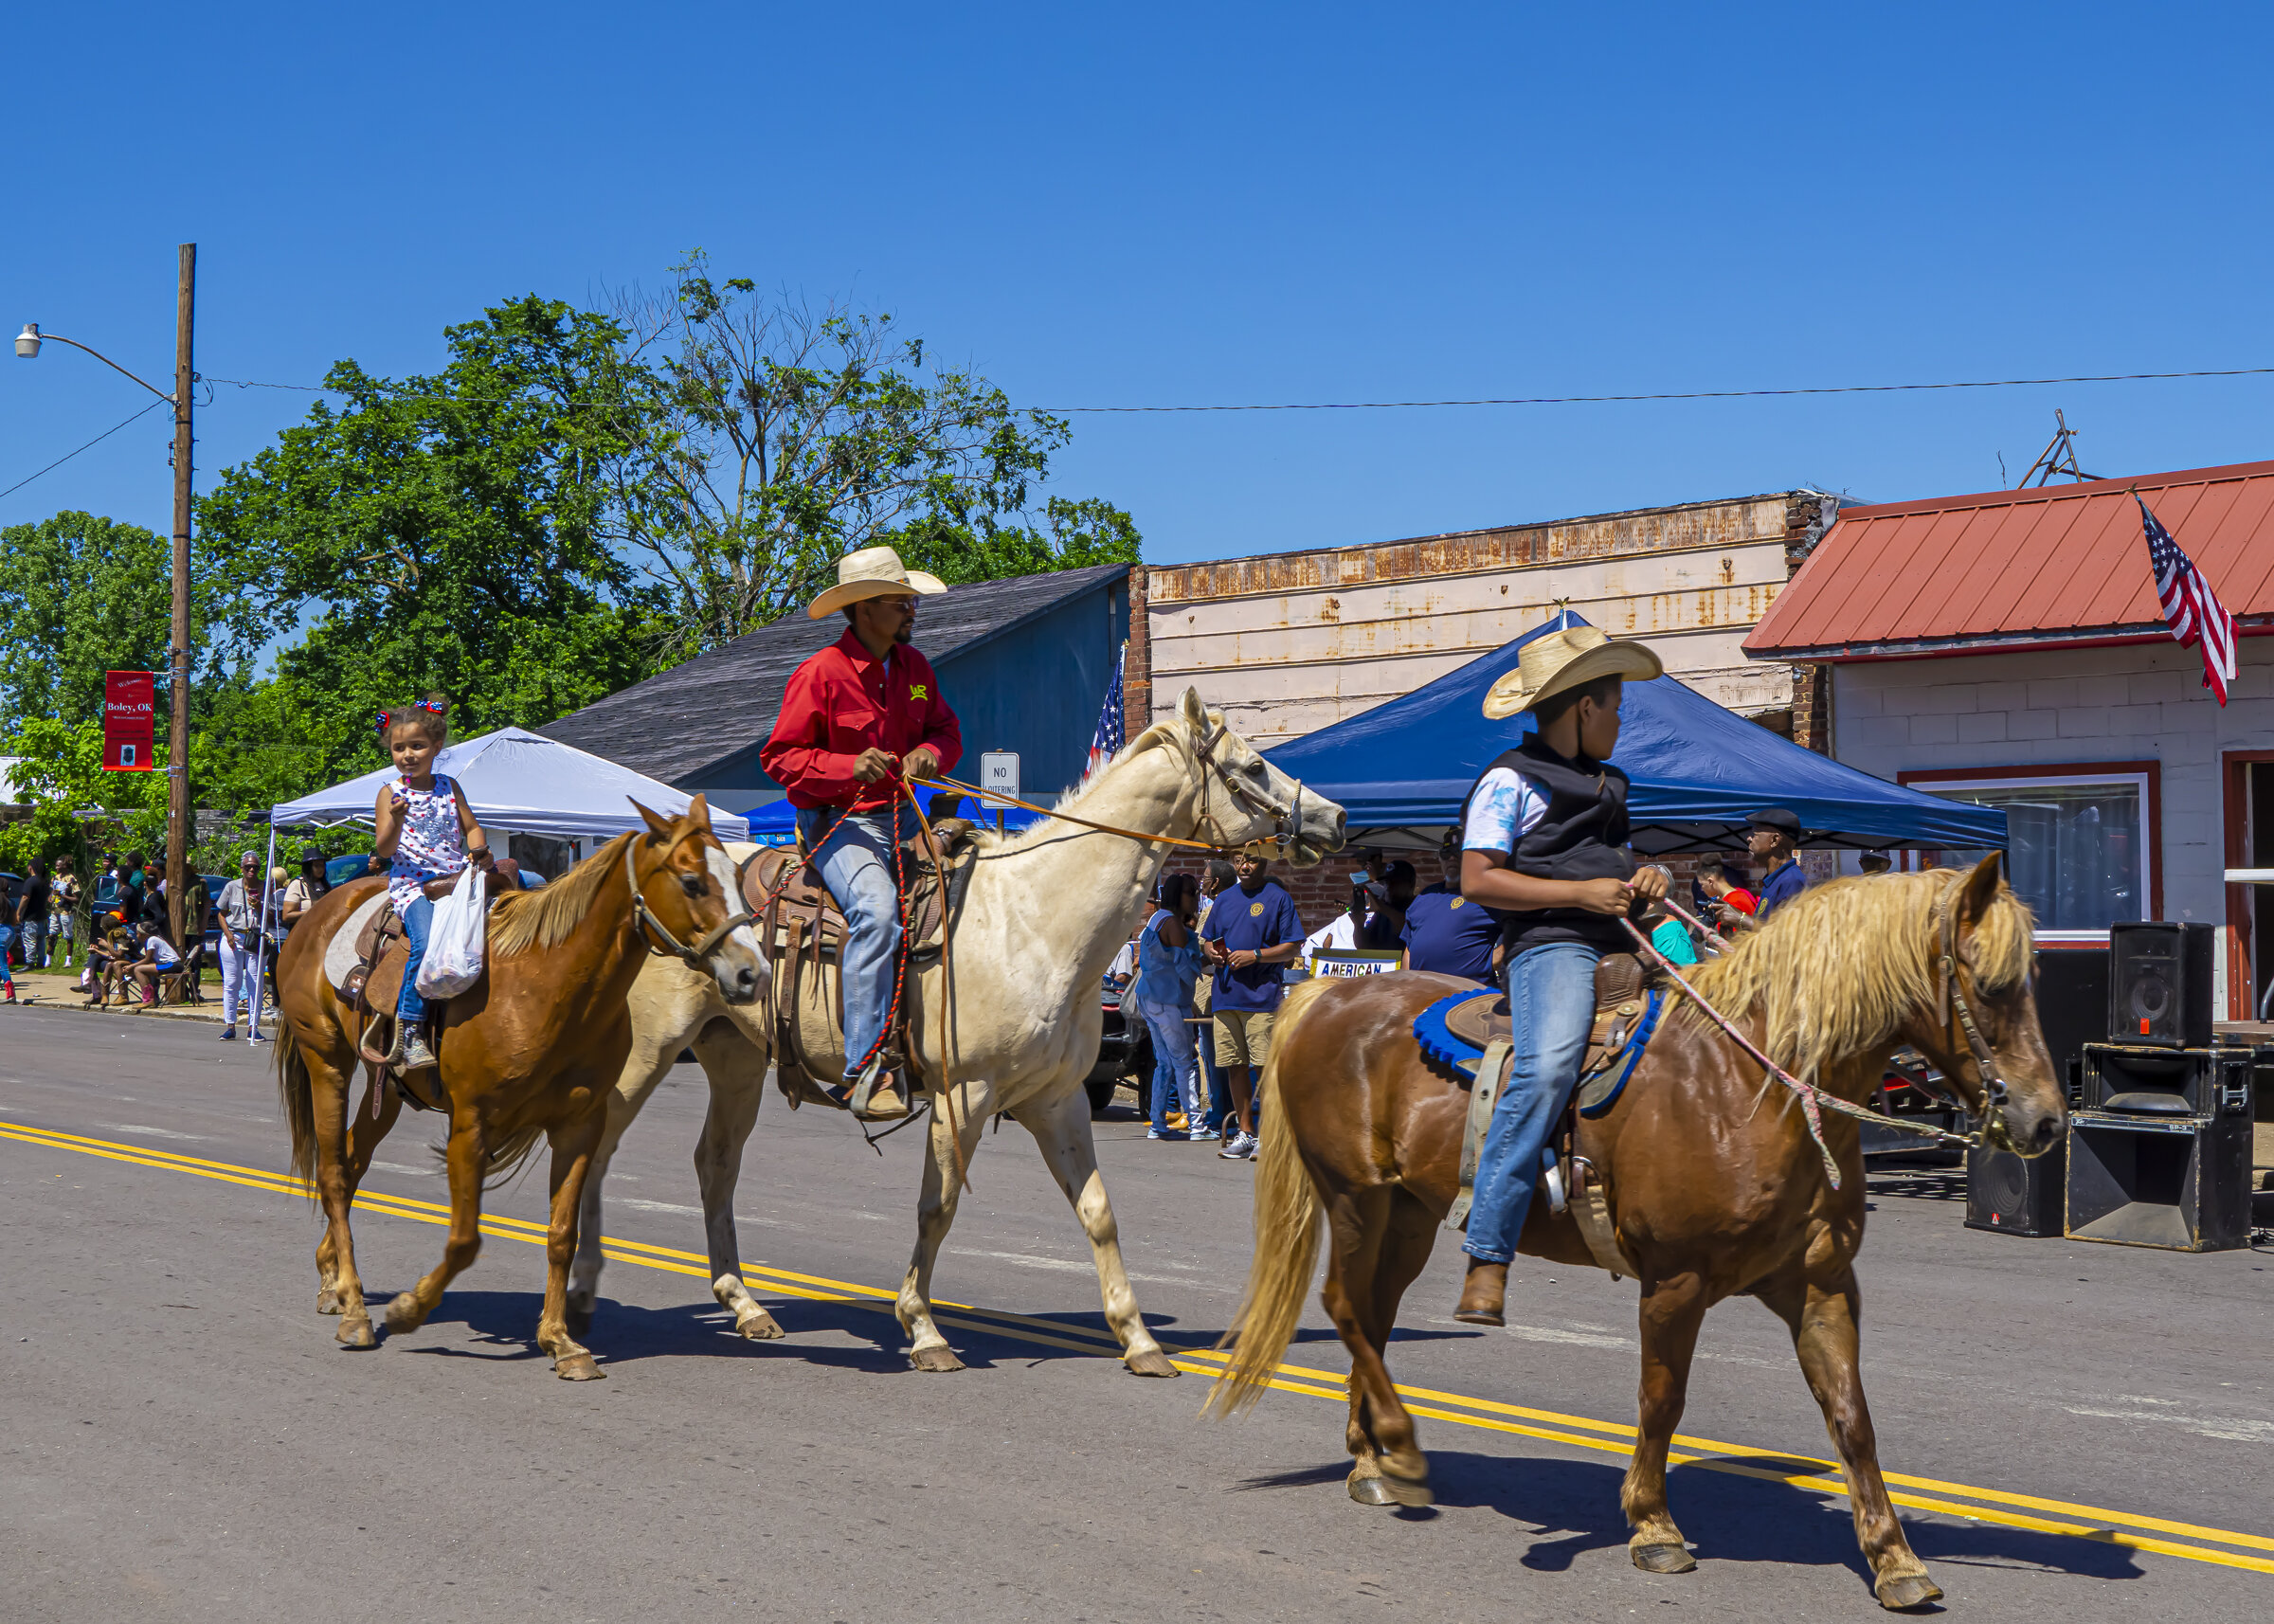 Dad and Kids in Boley Rodeo Parade